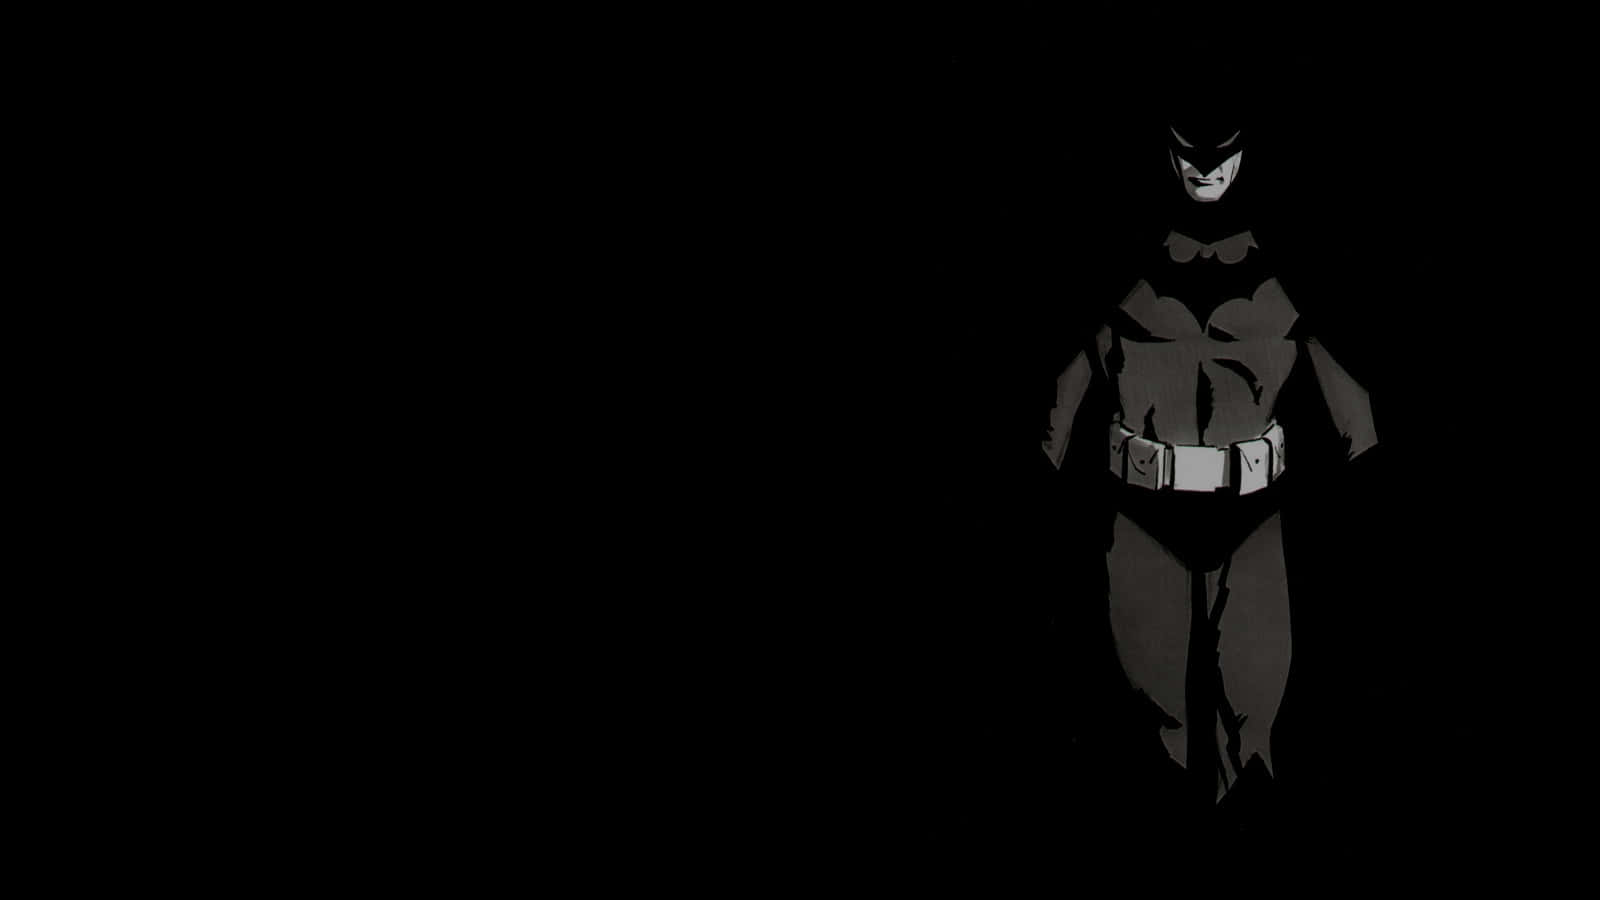 “Fight Evil with Justice - The Caped Crusader Takes Flight”